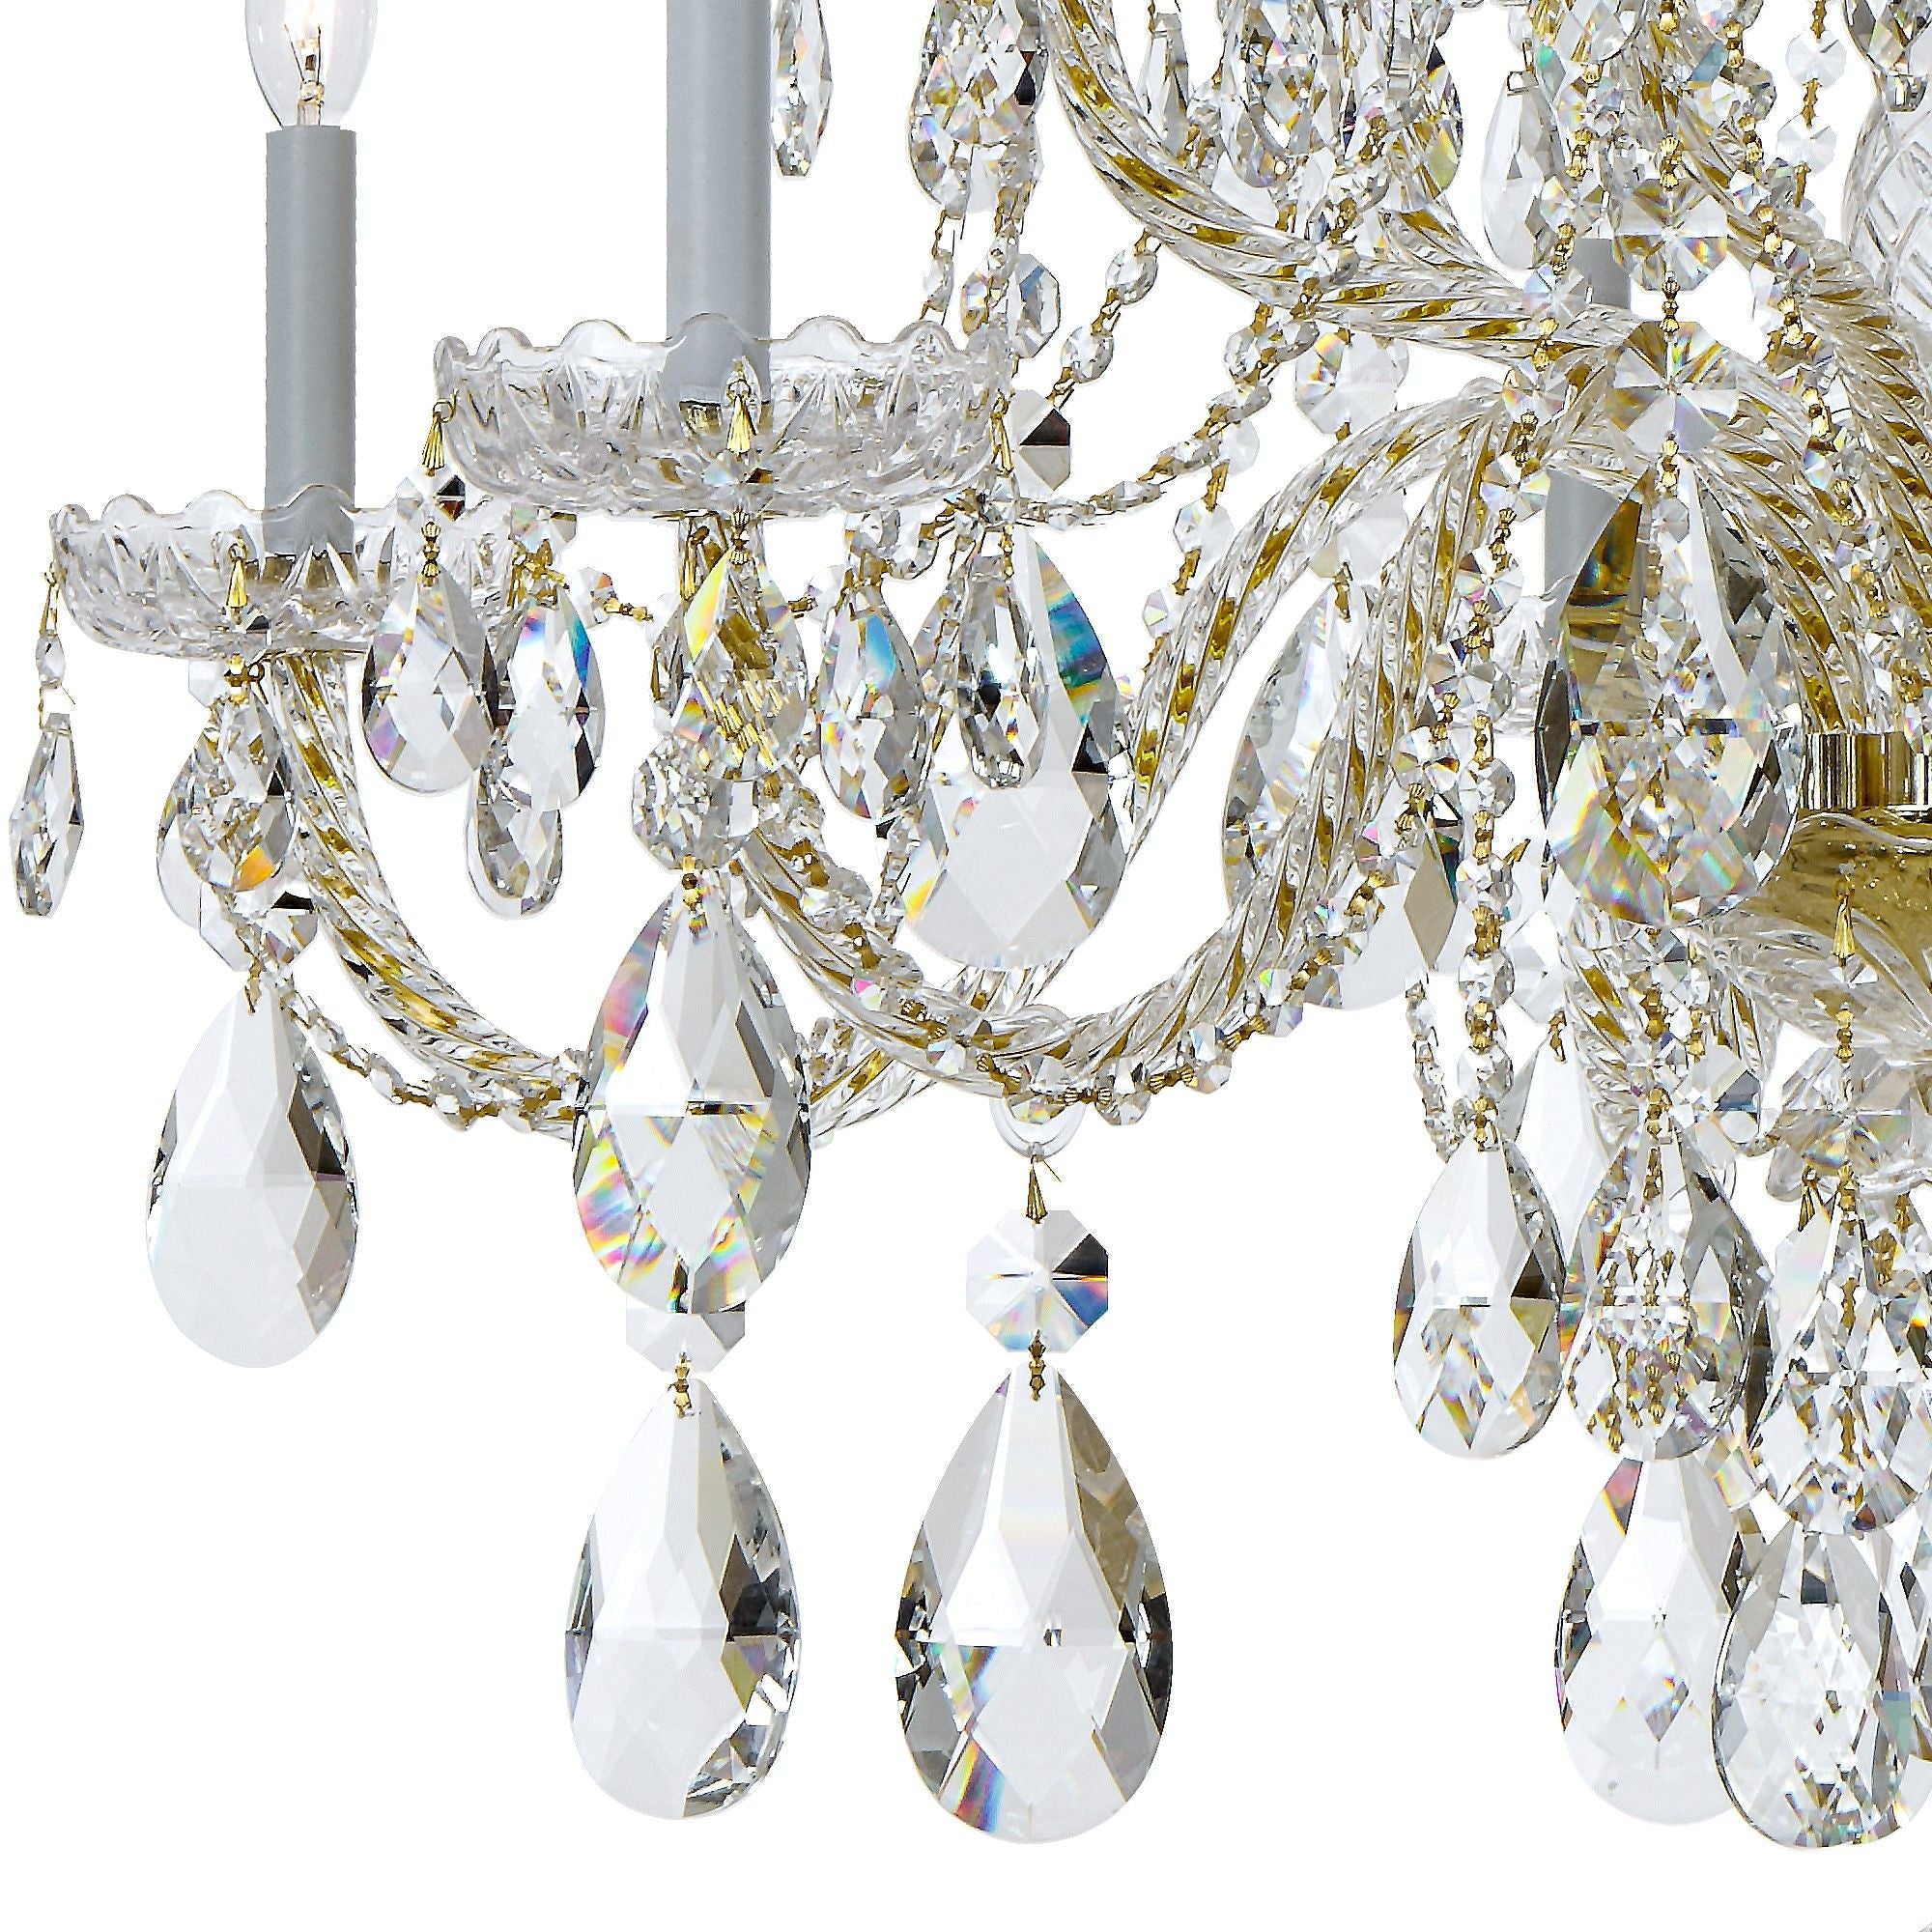 Traditional Crystal 12 Light Hand Cut Crystal Polished Brass Chandelier